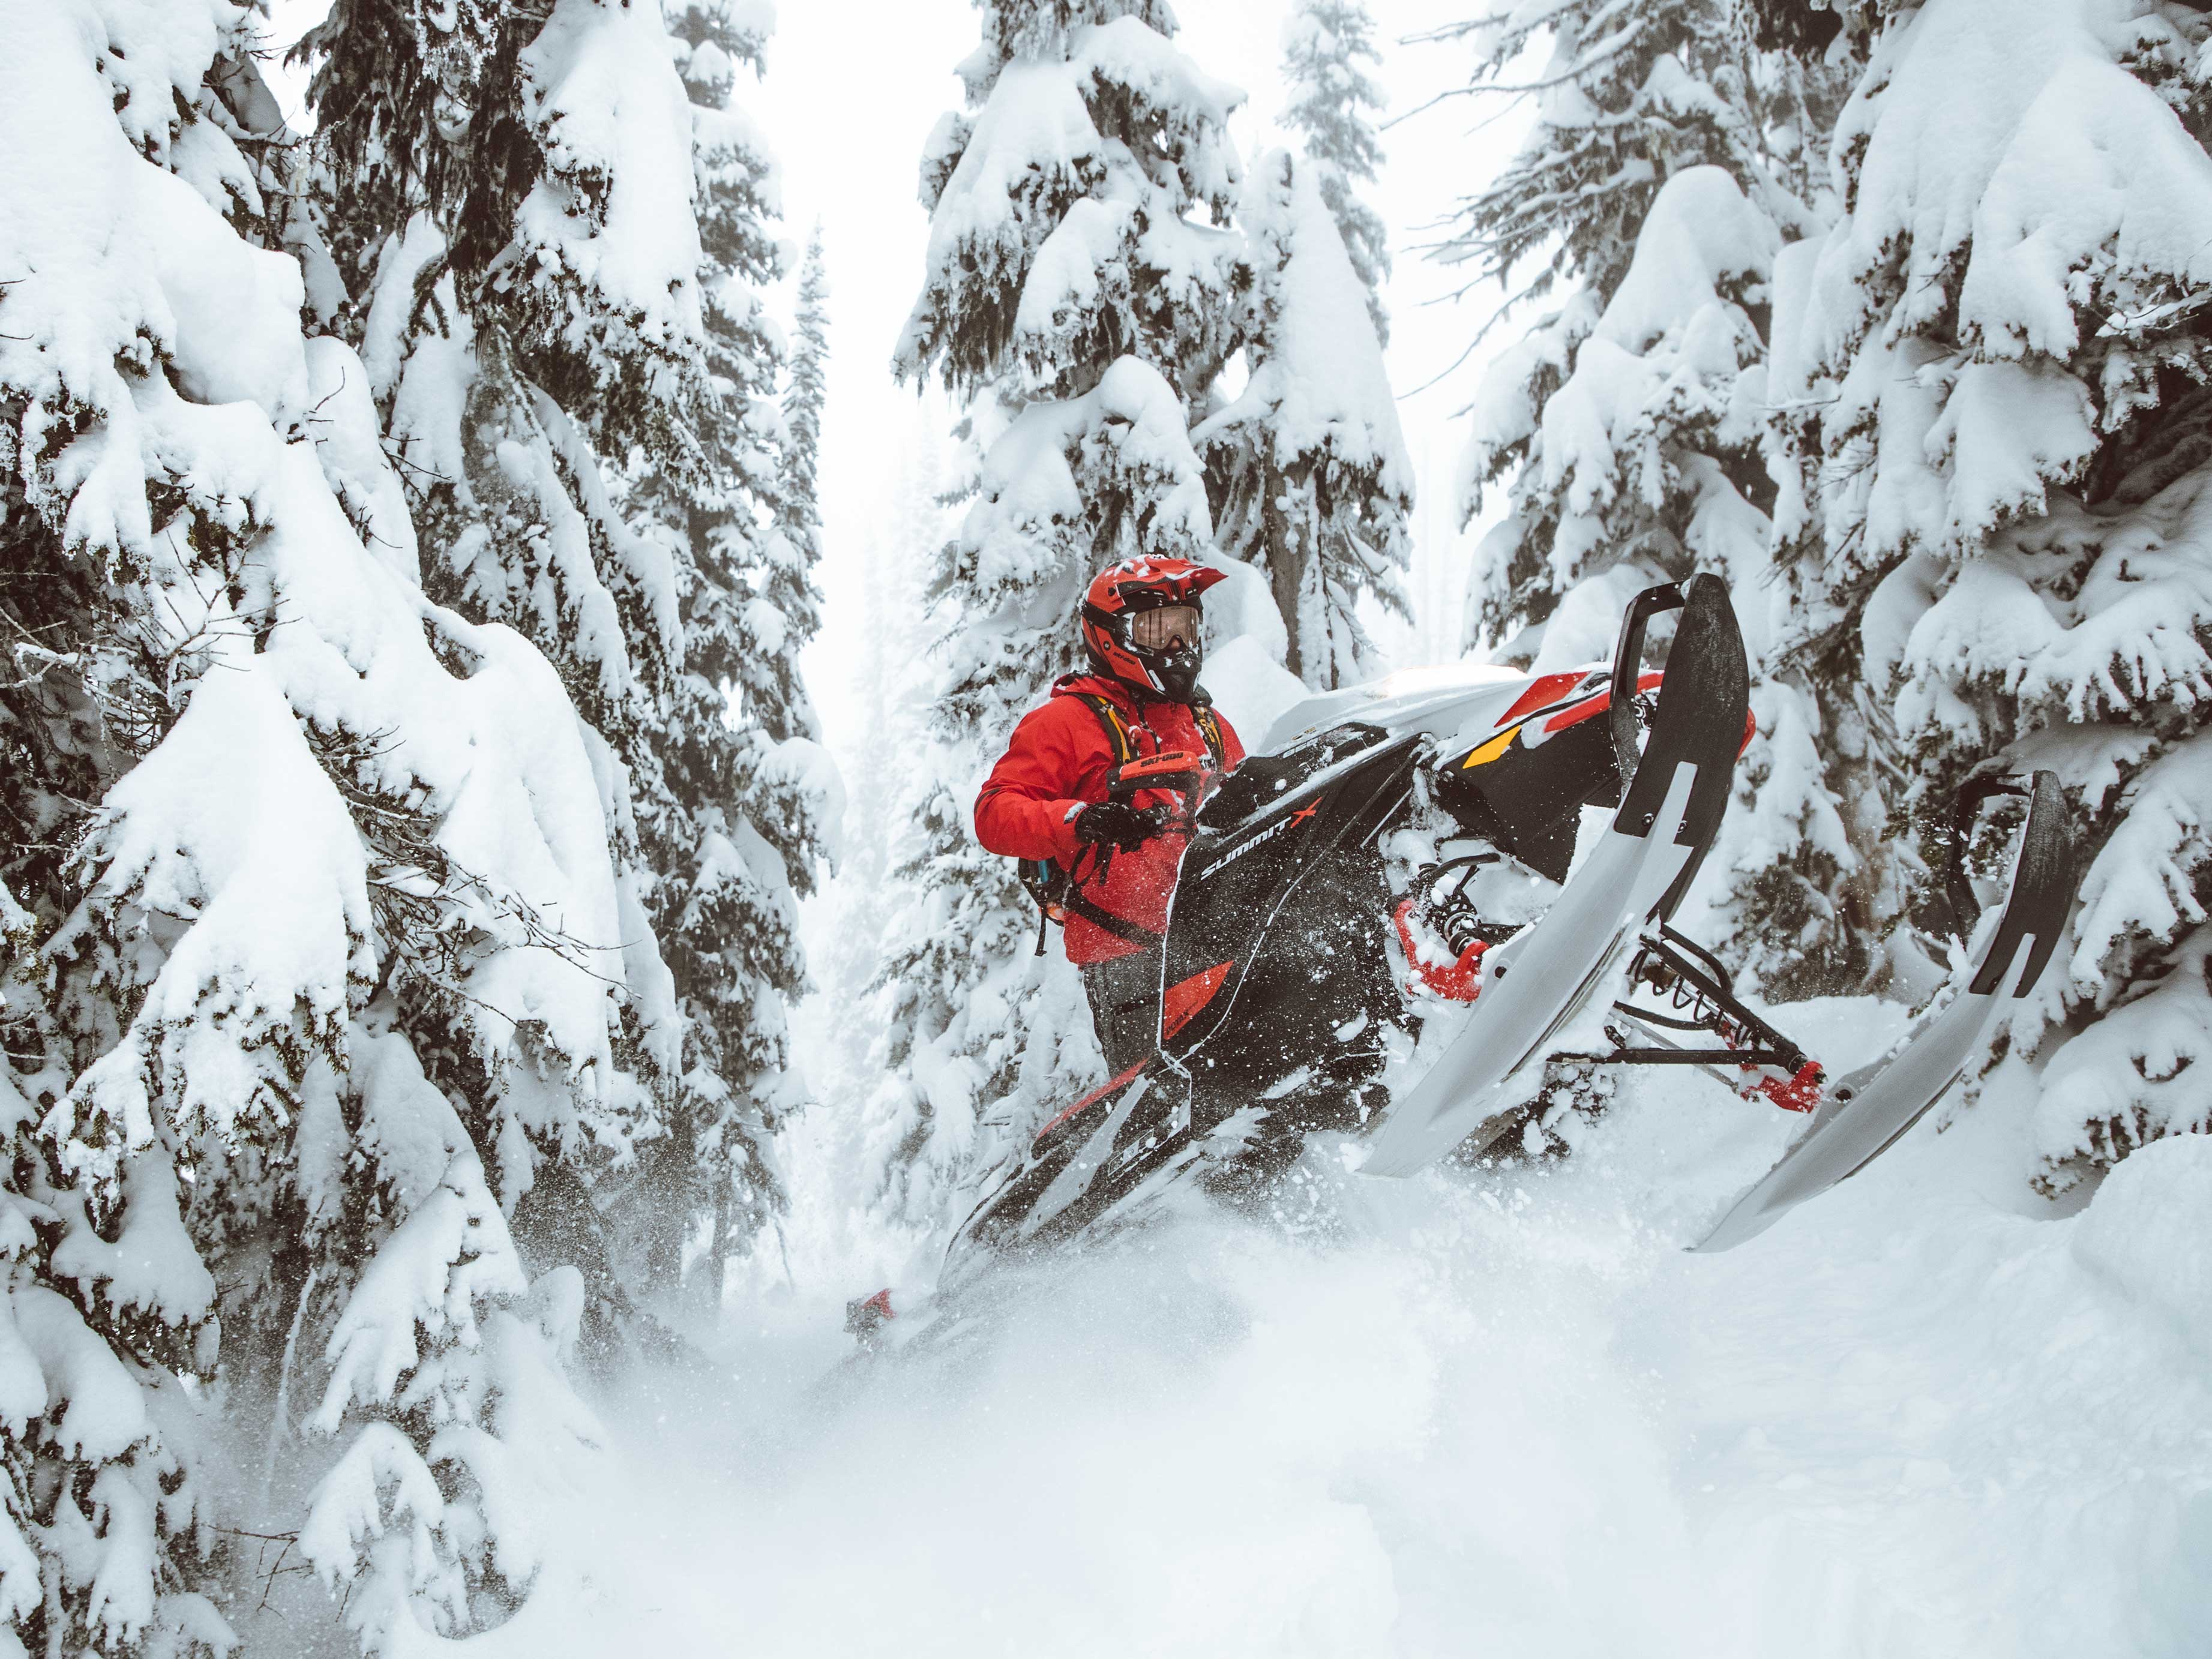 Tony Jenkins riding his Ski-Doo in a snowy forest